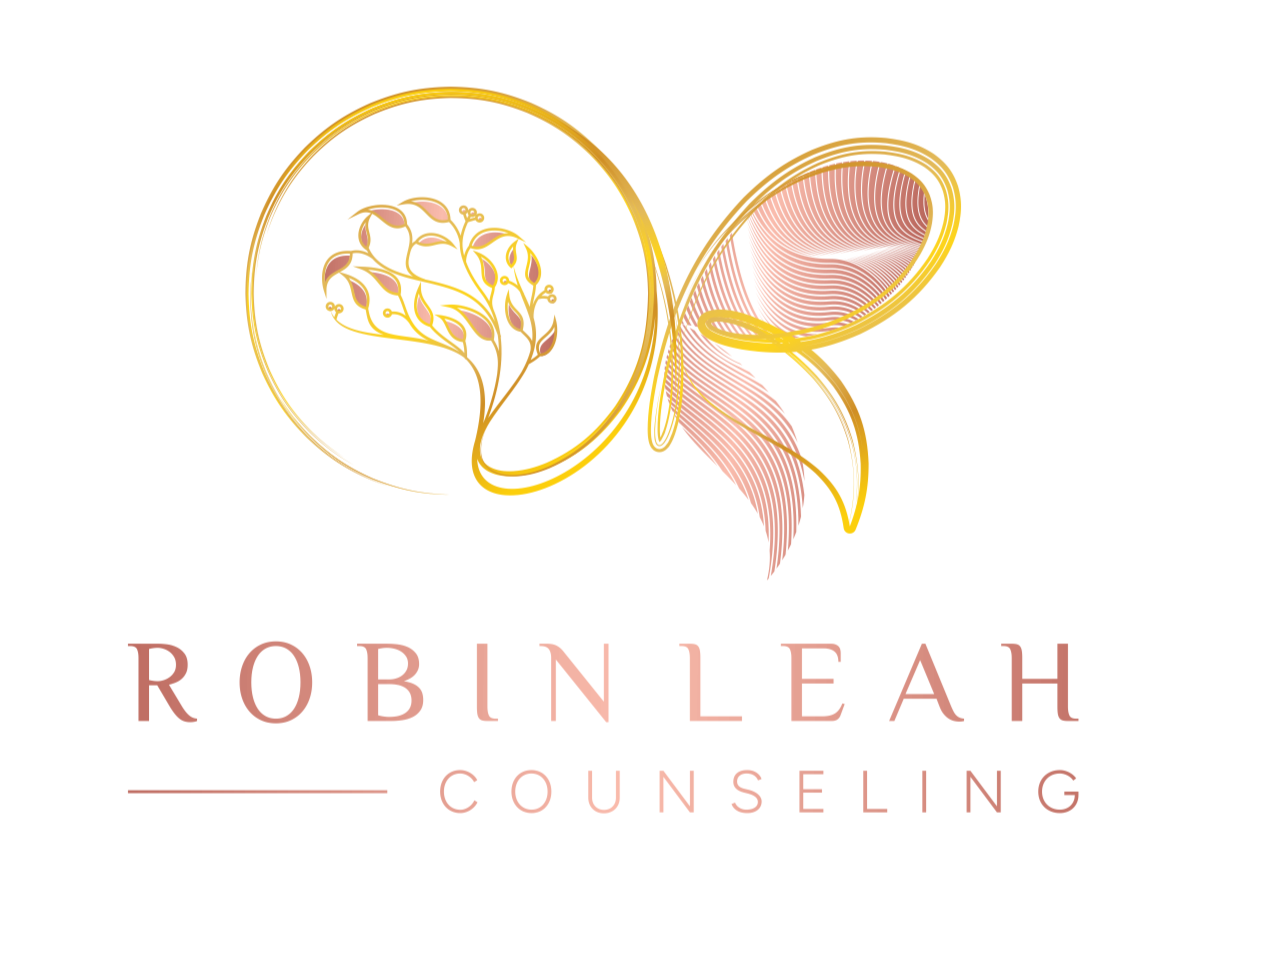 Robin Leah Counseling